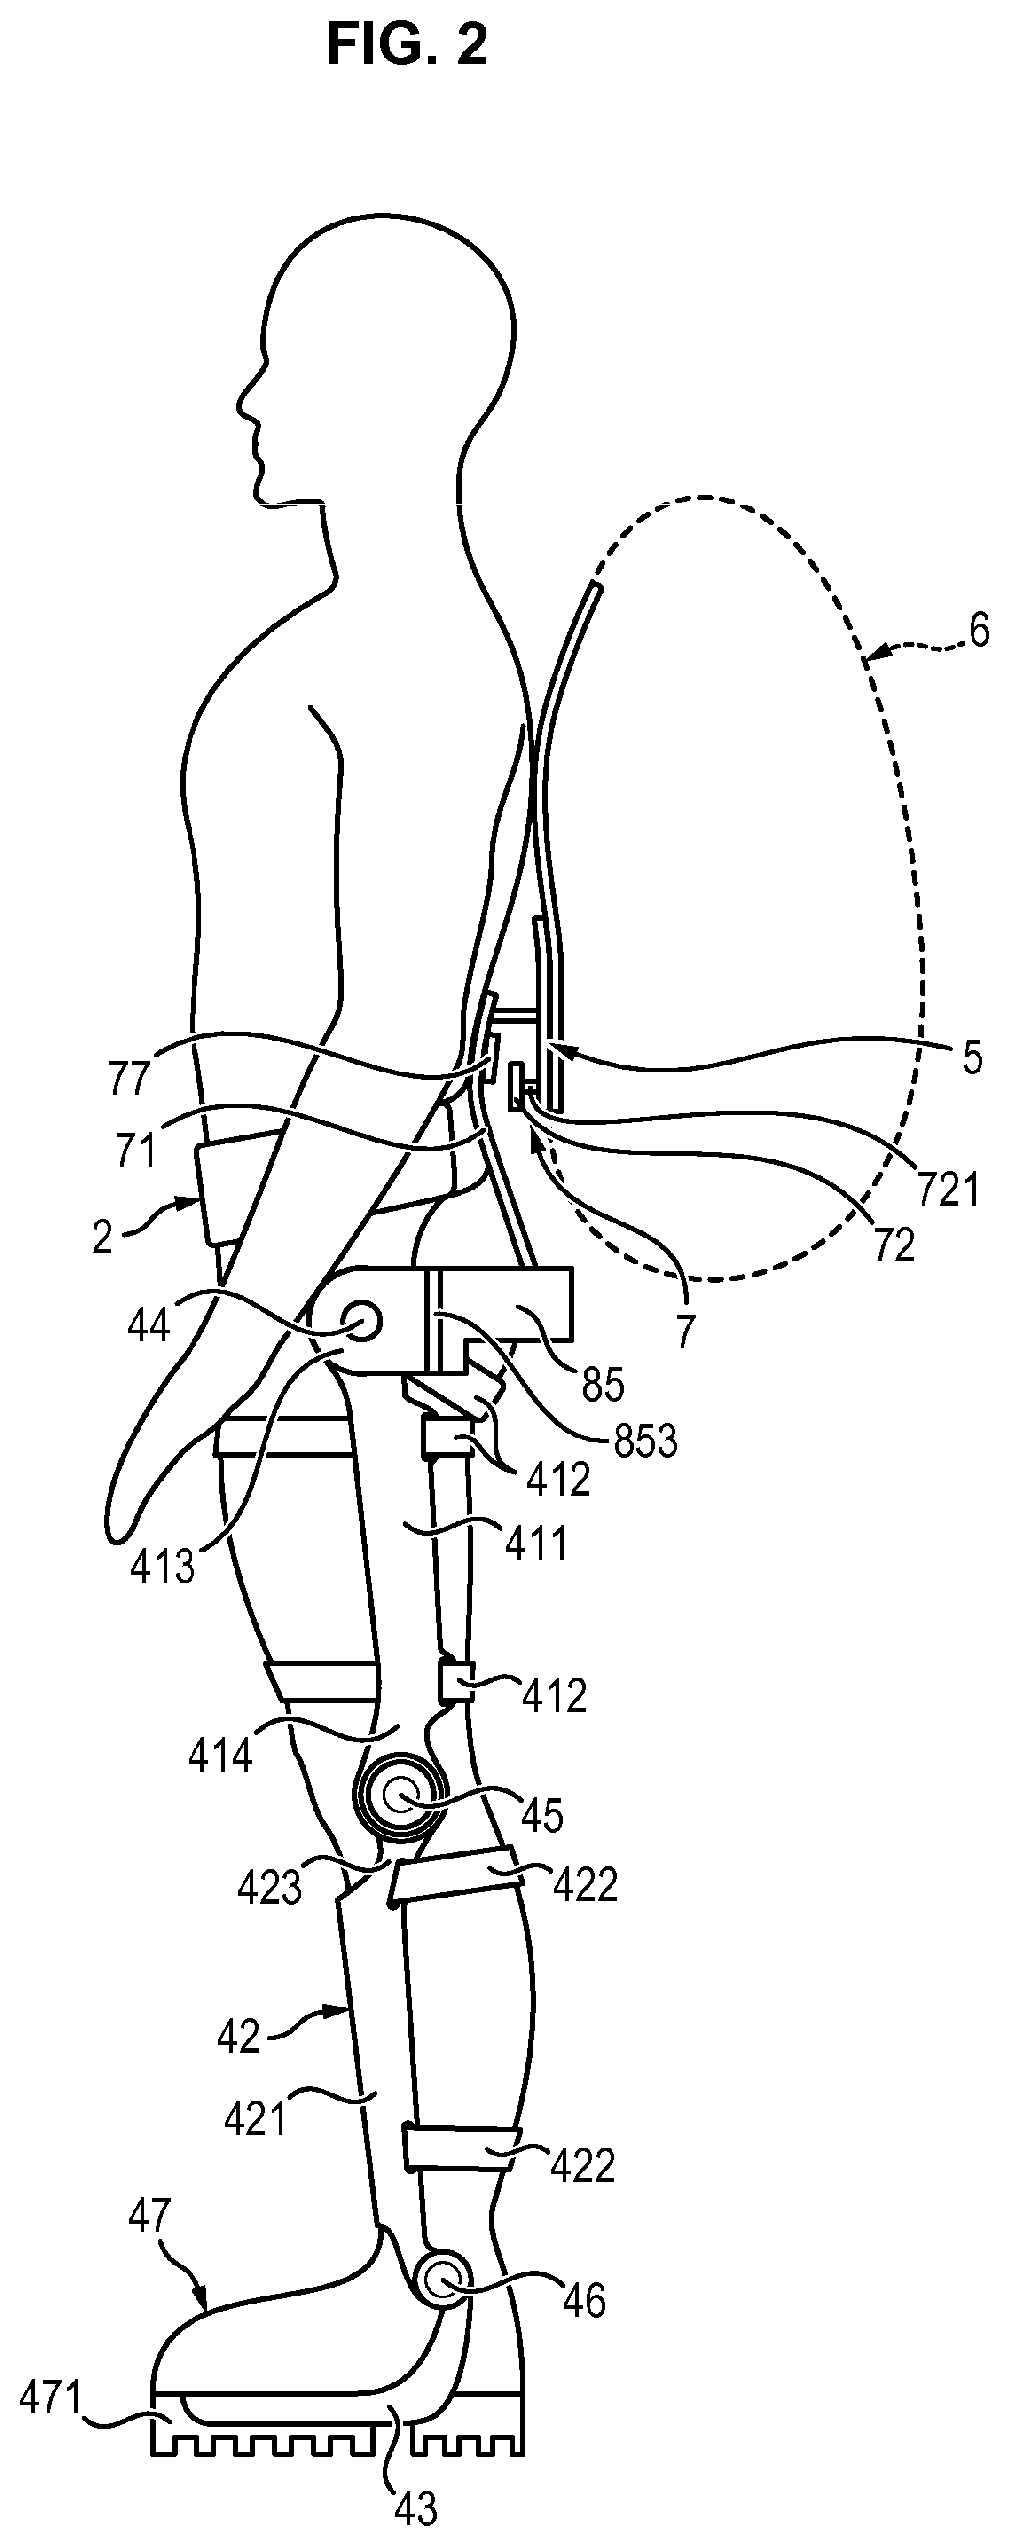 Linking device for an exoskeleton structure facilitating the carrying of loads while walking or running